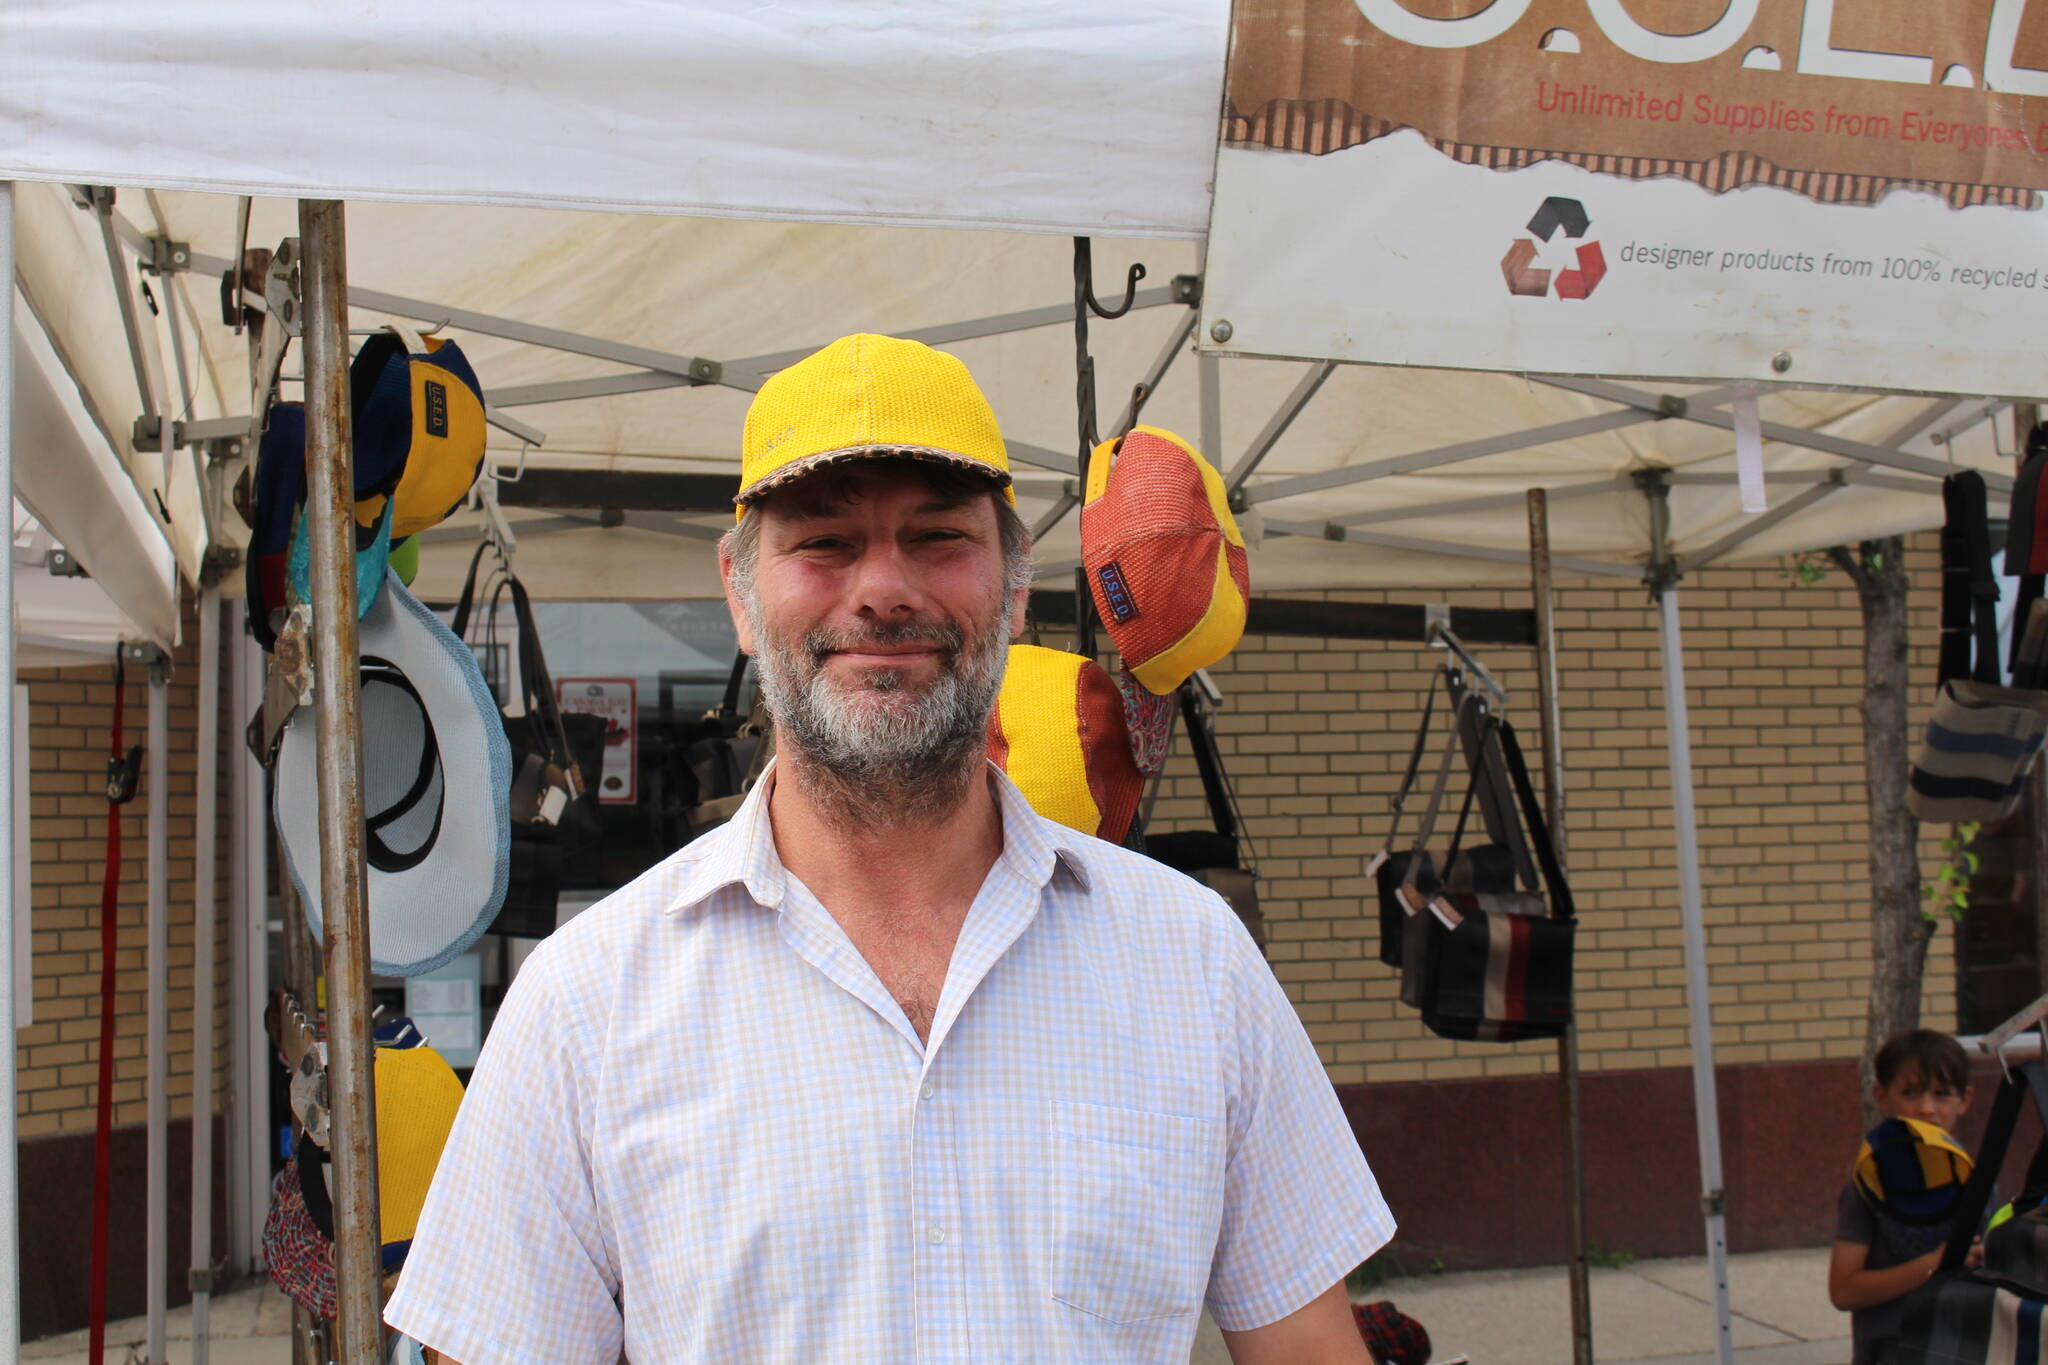 Trevor Kehler stands in front of his U.S.E.D. stand sporting one of his own hats at the LFI Farmers Market in Revelstoke, June 17, 2023. (Zachary Delaney/Revelstoke Review)